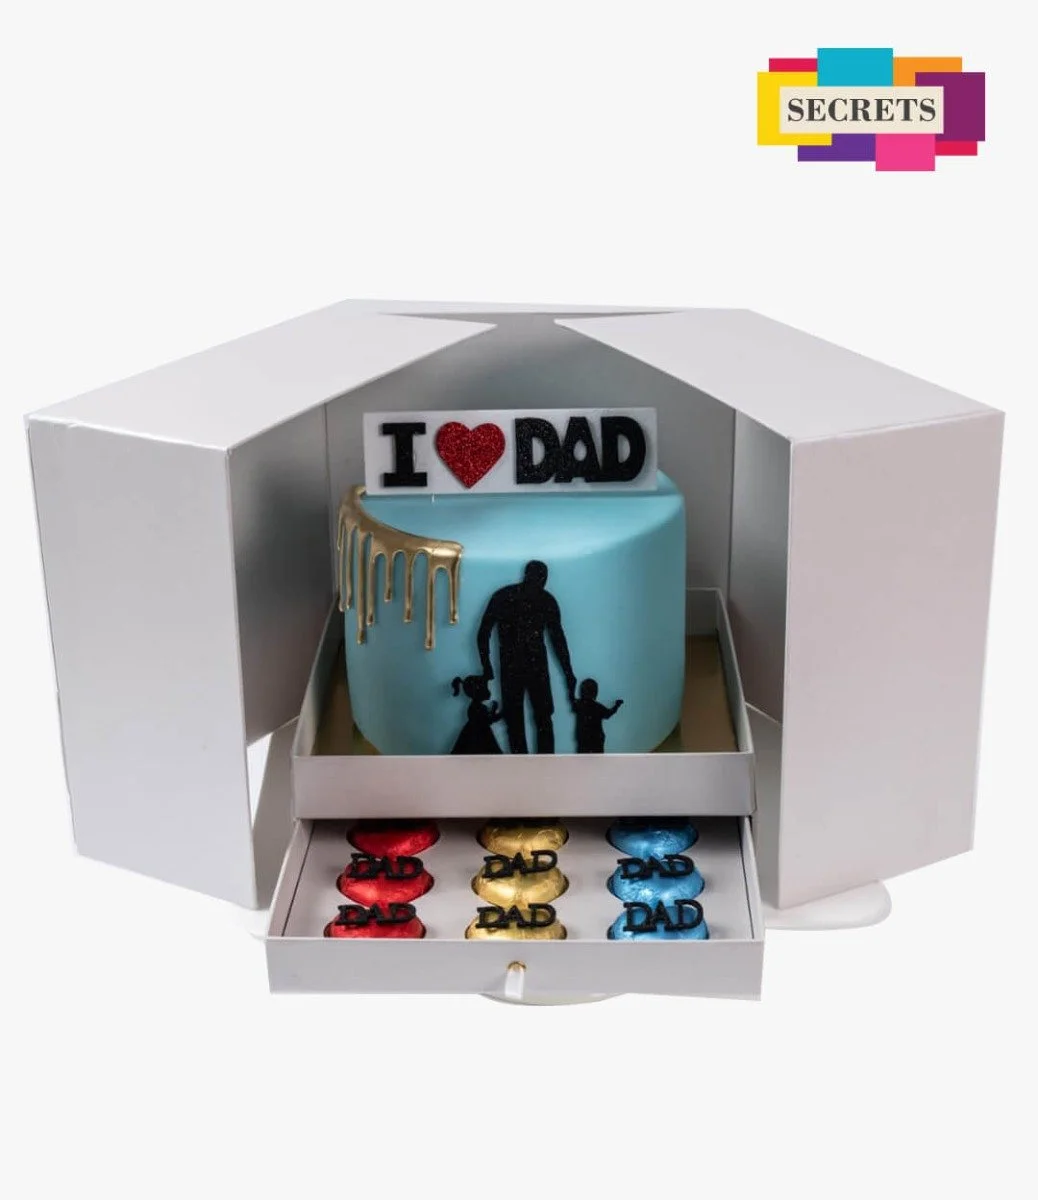 I Love Dad Cake and Chocolates Box by Secrets